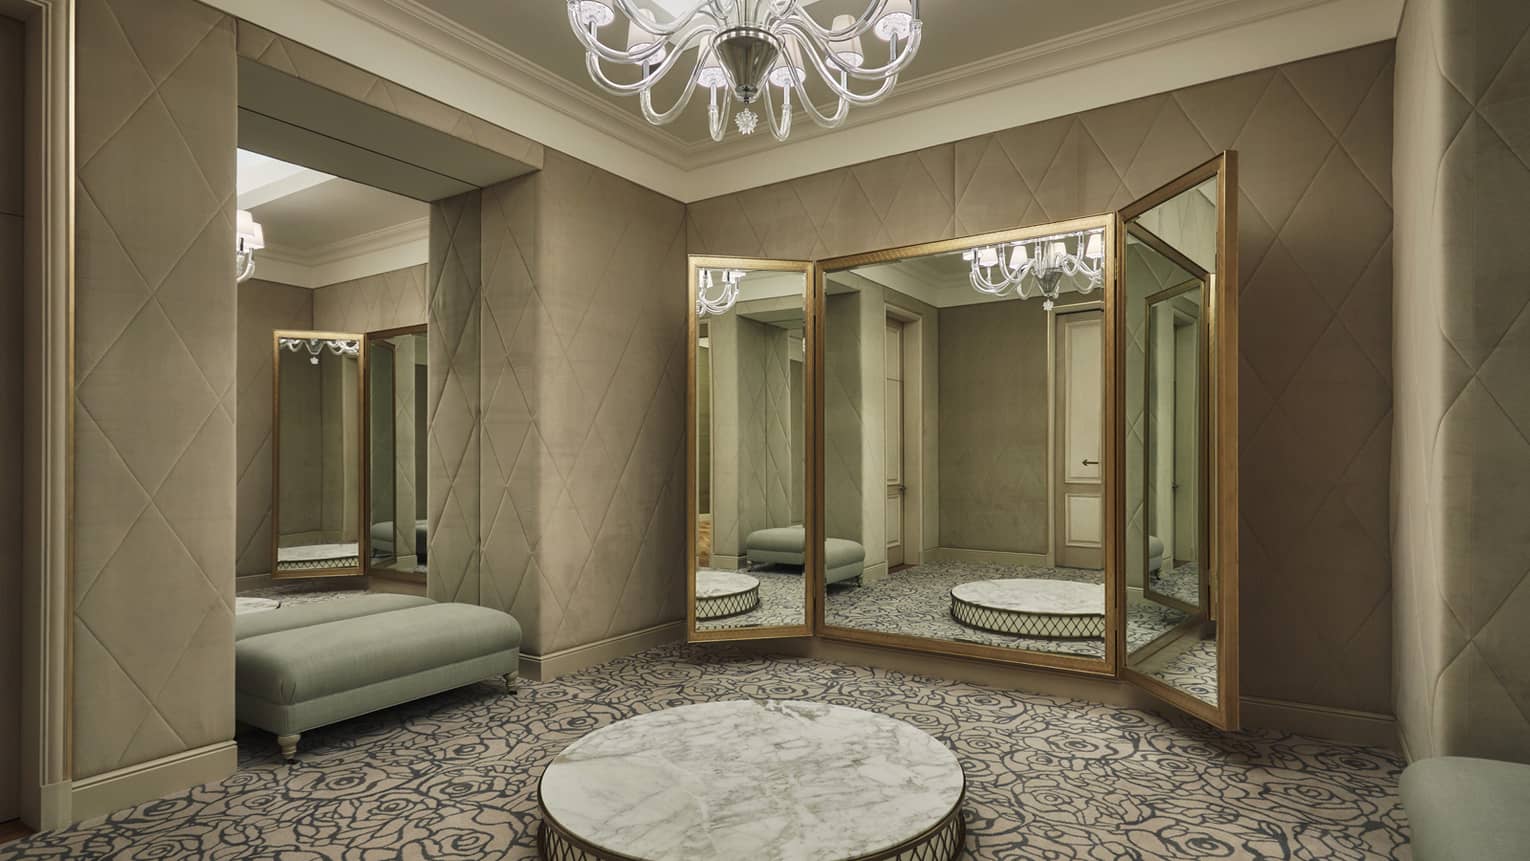 Private bridal suite changing room with round platform before large mirrors, chaise